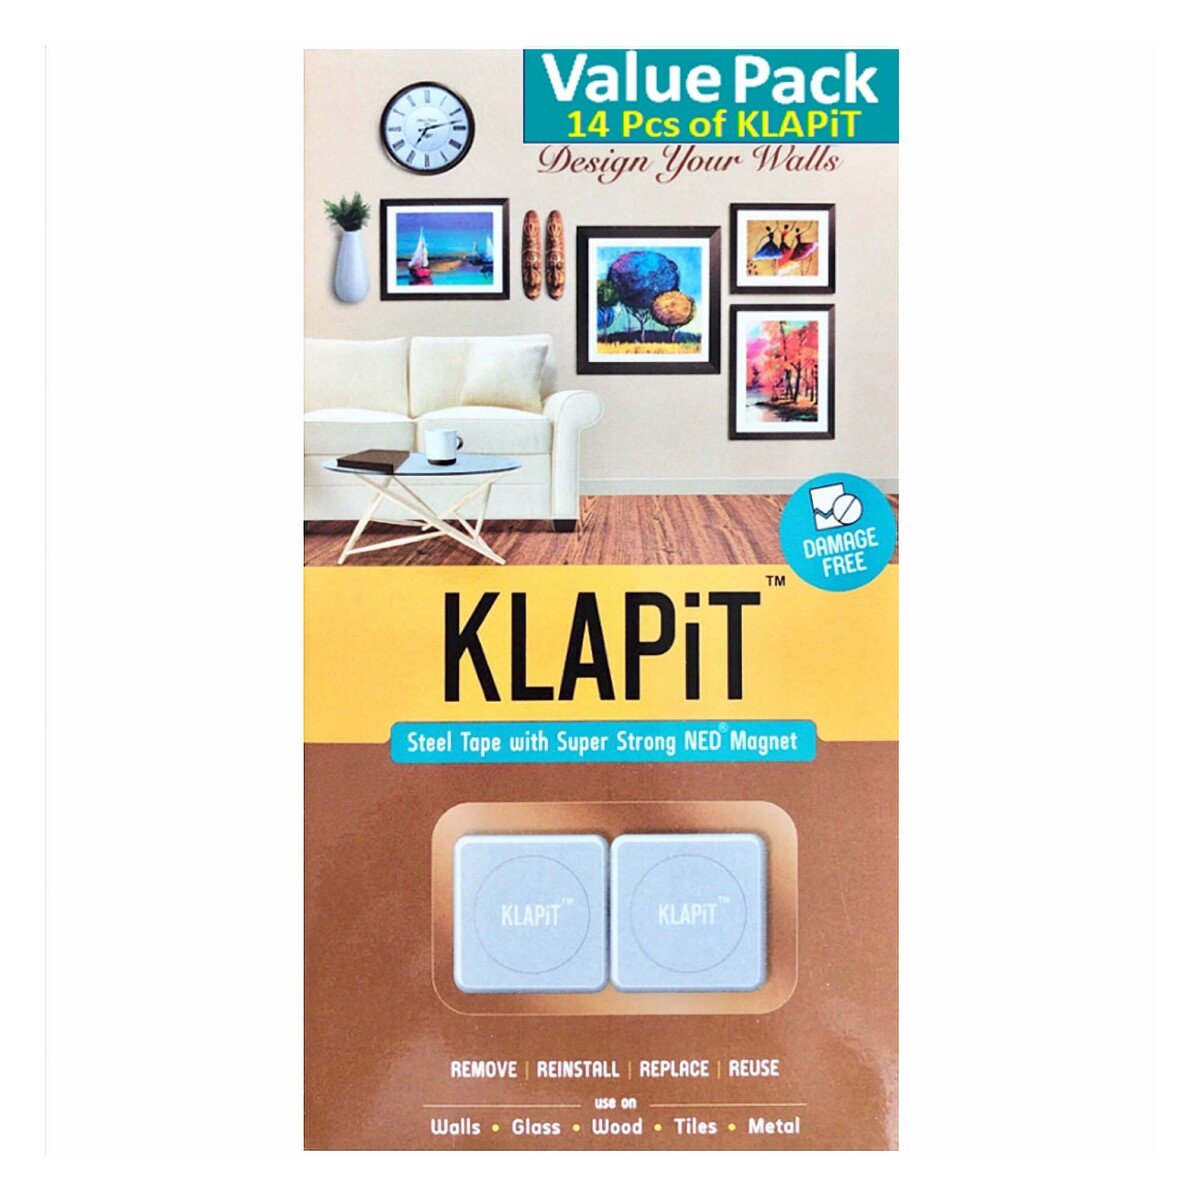 KLAPiT Magnetic Wall Strips For Damage Free Hanging Pictures & Frames 49WWB14P 14pcs